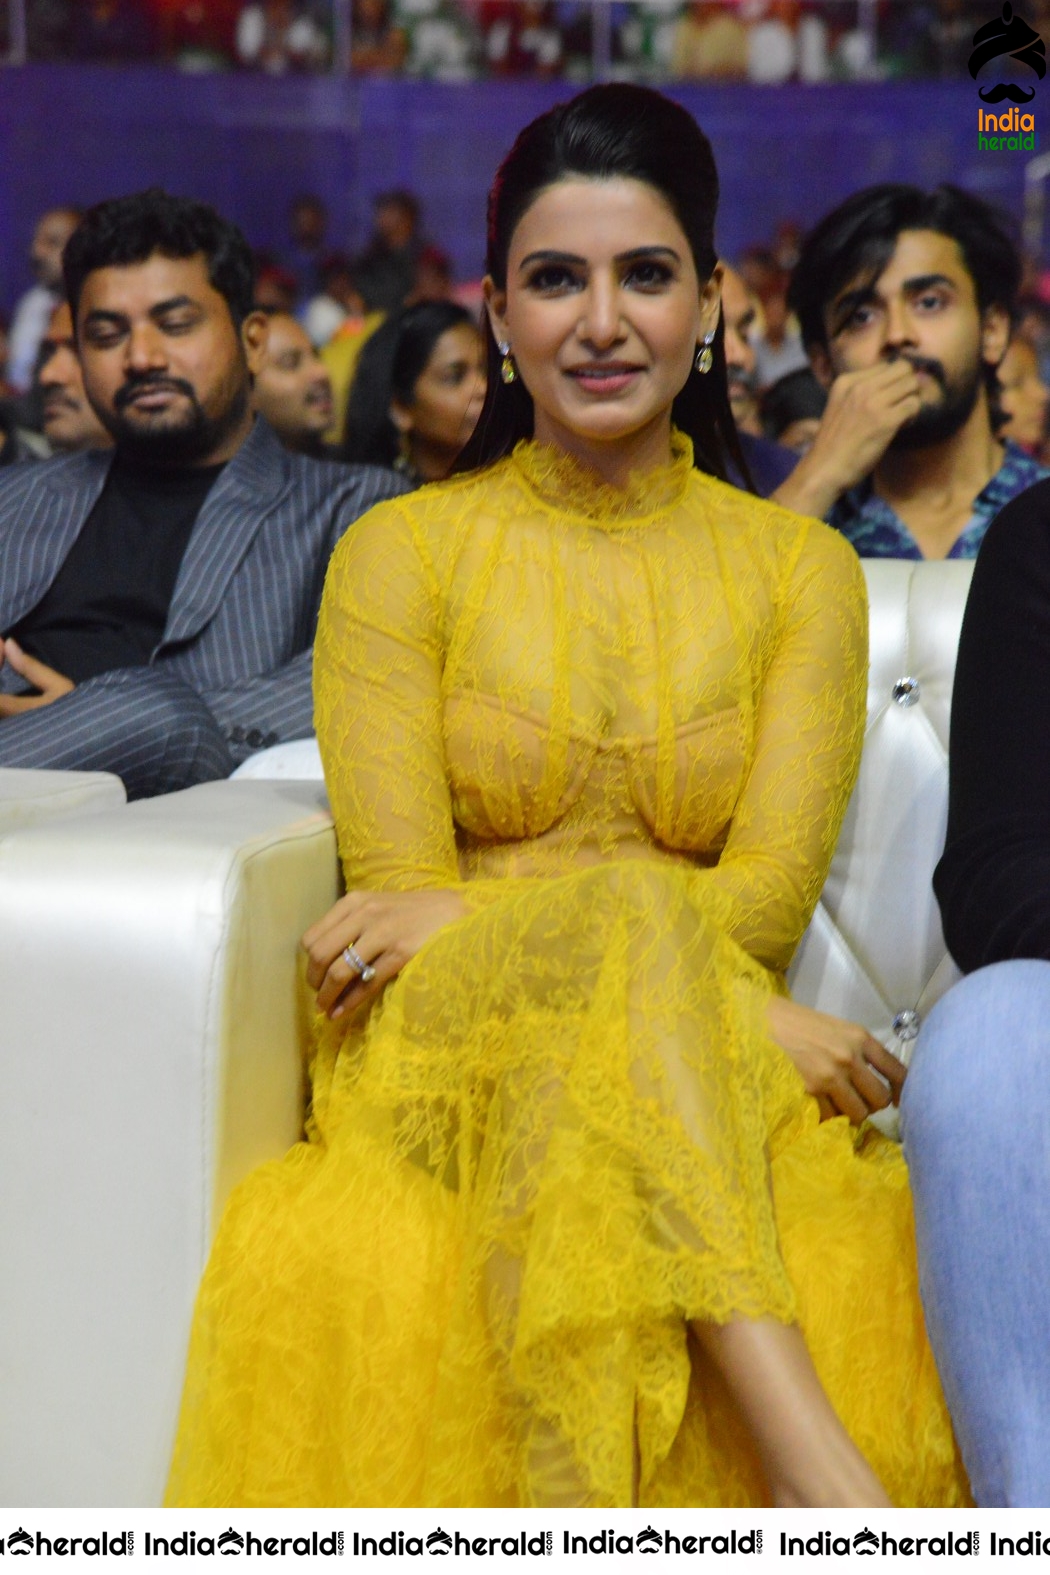 Sizzling Samantha Oozing Hotness in Transparent Yellow Outfit Set 2